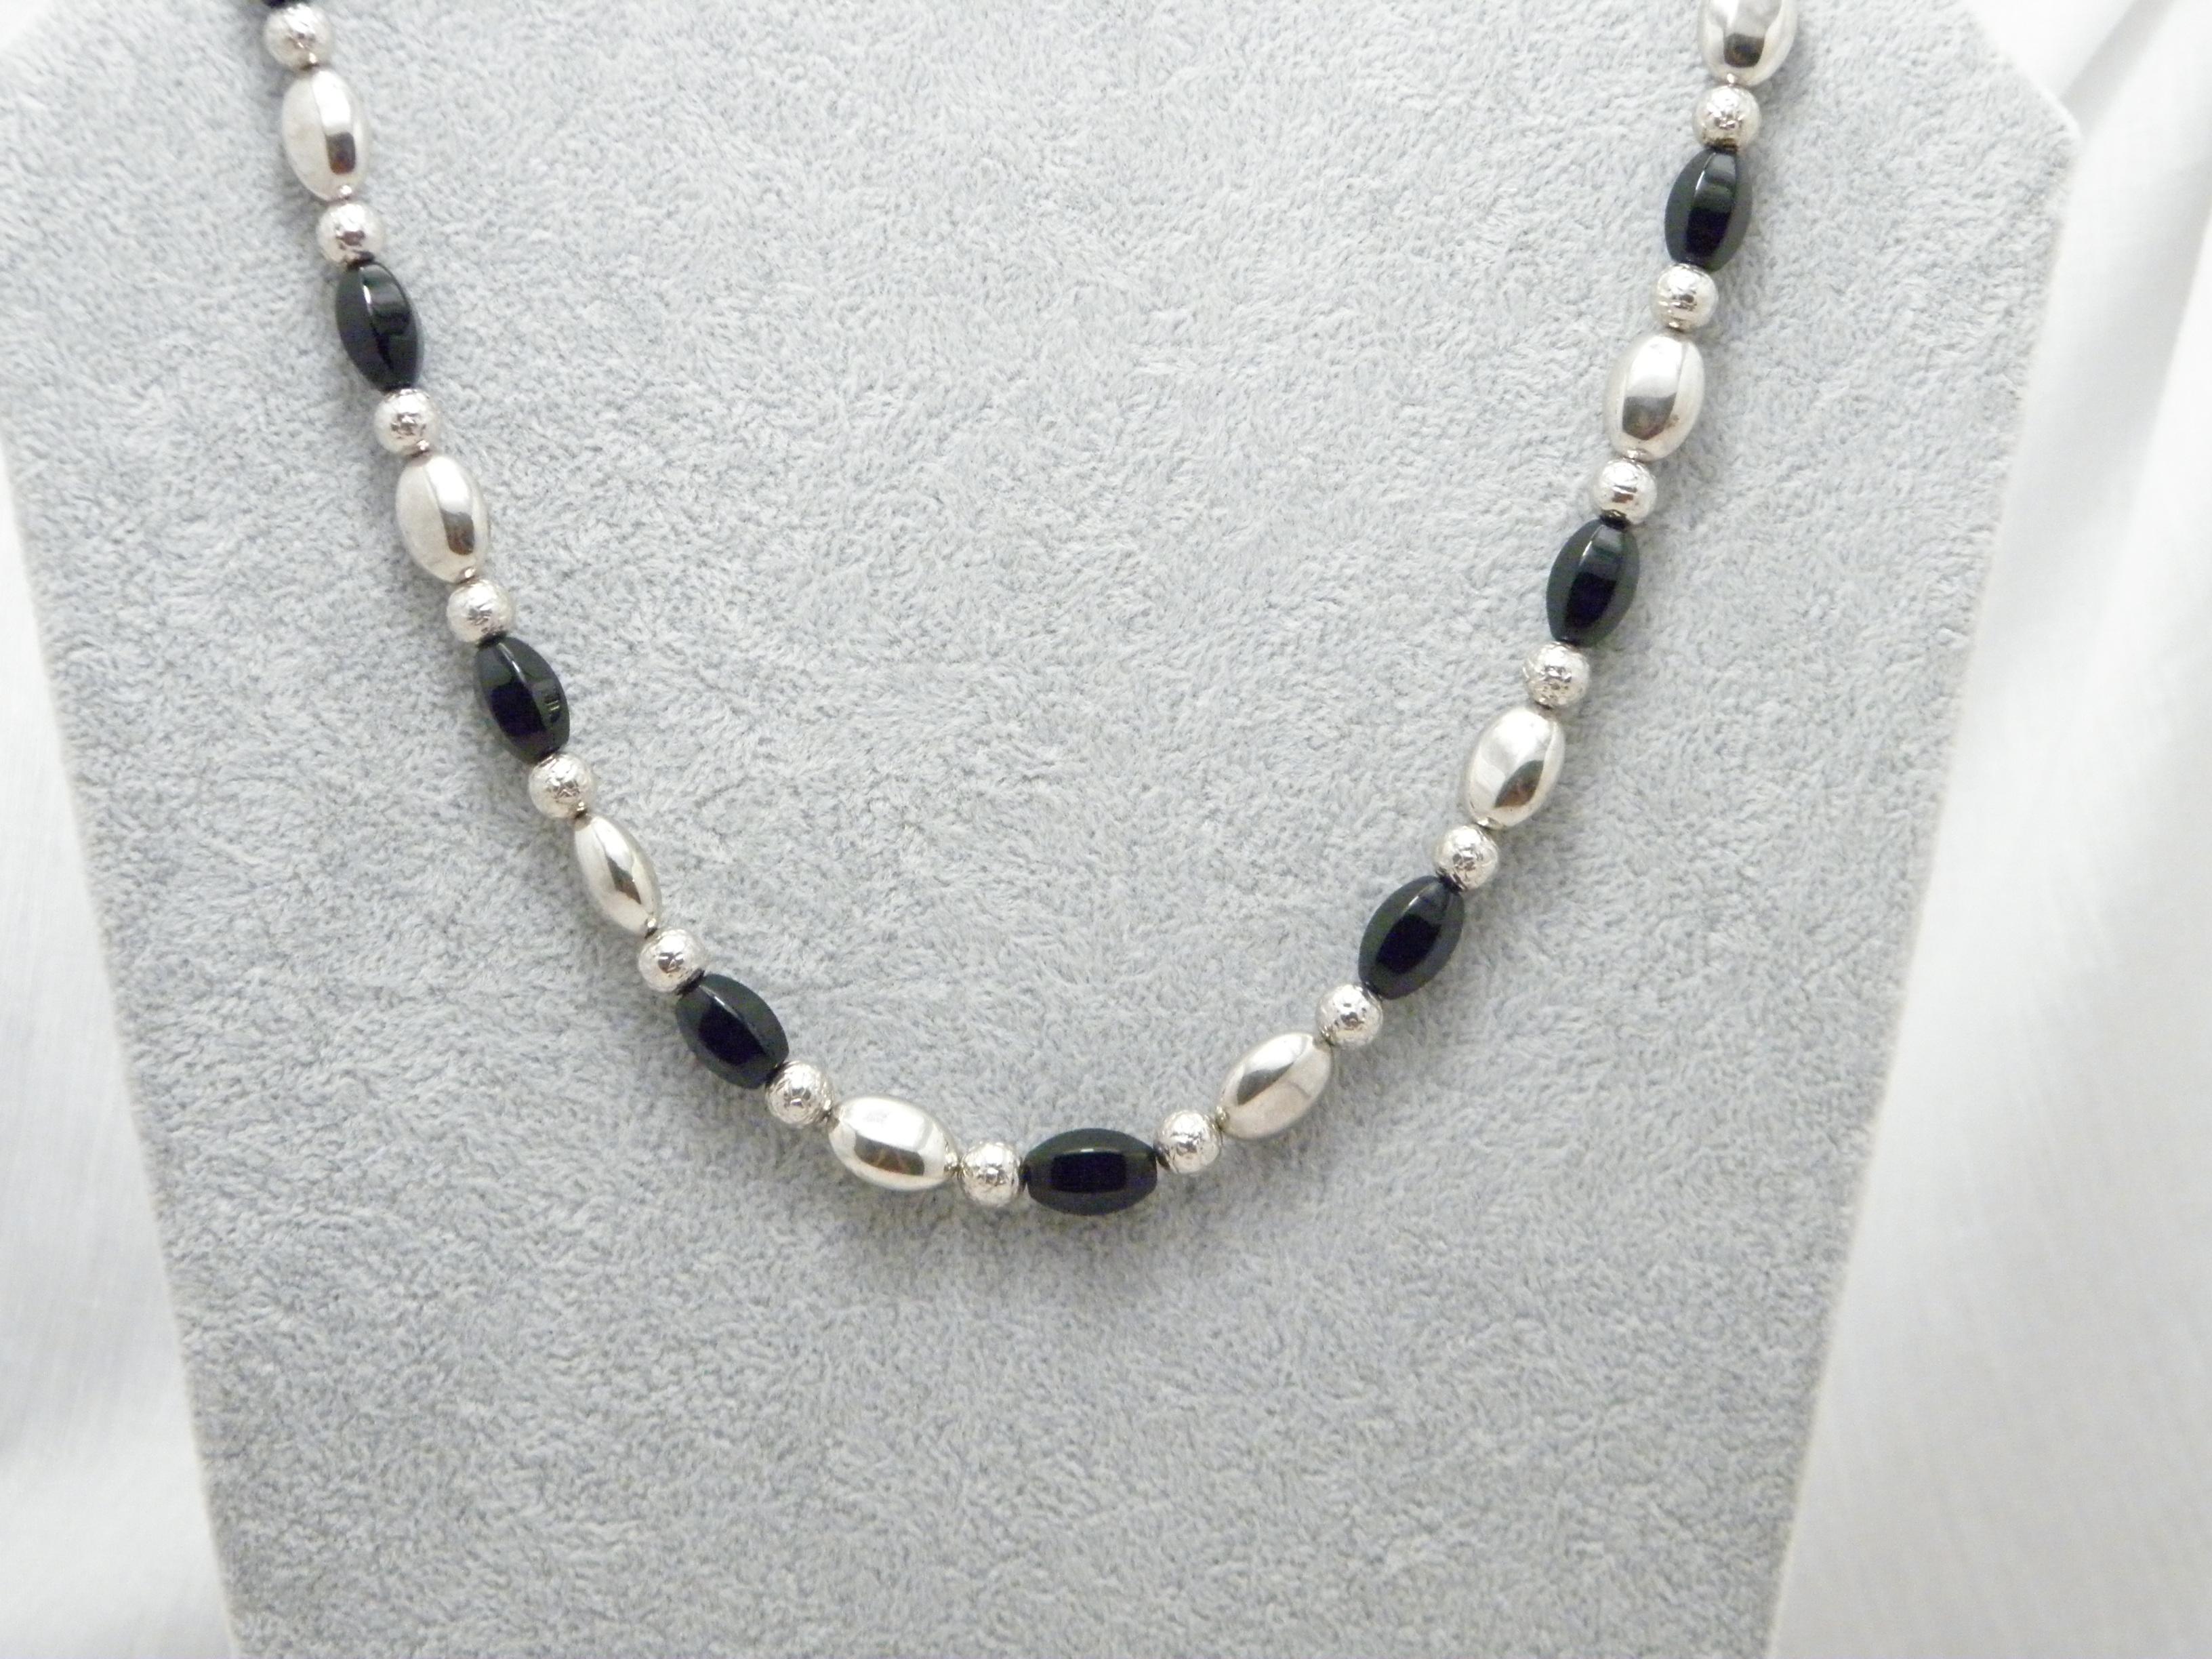 If you have landed on this page then you have an eye for beauty.

On offer is this gorgeous

STERLING SILVER BLACK JET MOURNING STYLE NECKLACE CHAIN

DETAILS
Material: Sterling Silver (chain and beads)
Gemstones: Factetted torpedo style black Jet